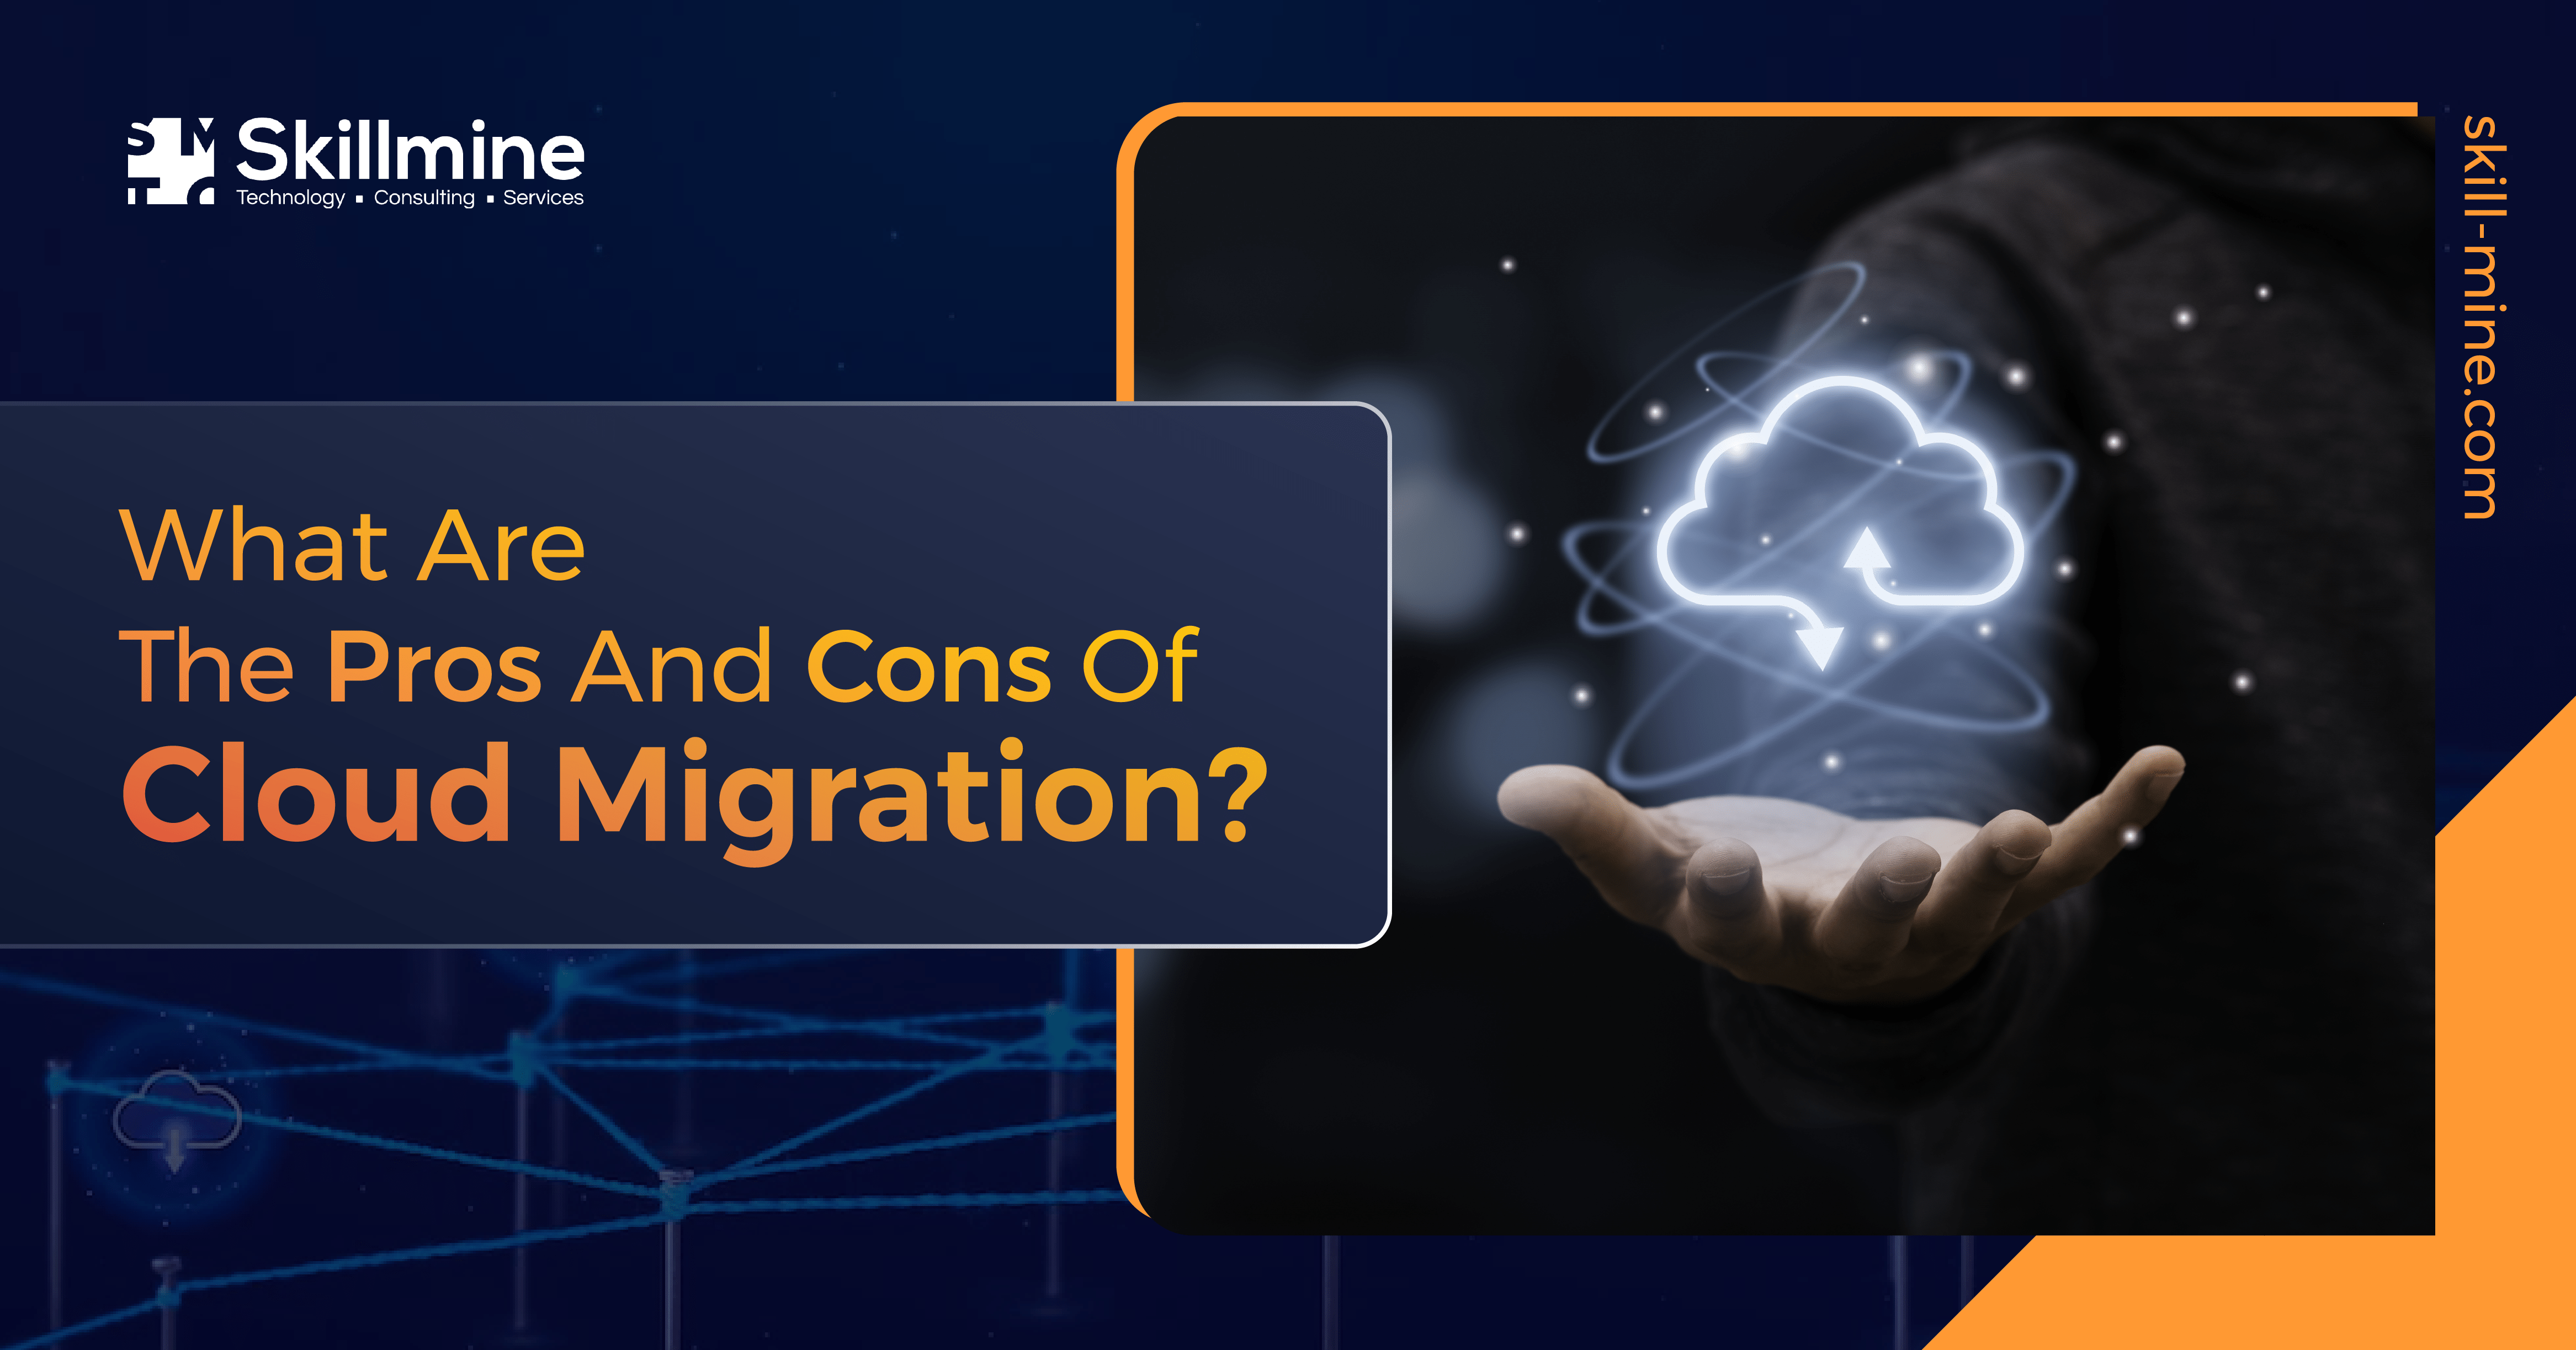 What Are The Pros And Cons Of Cloud Migration